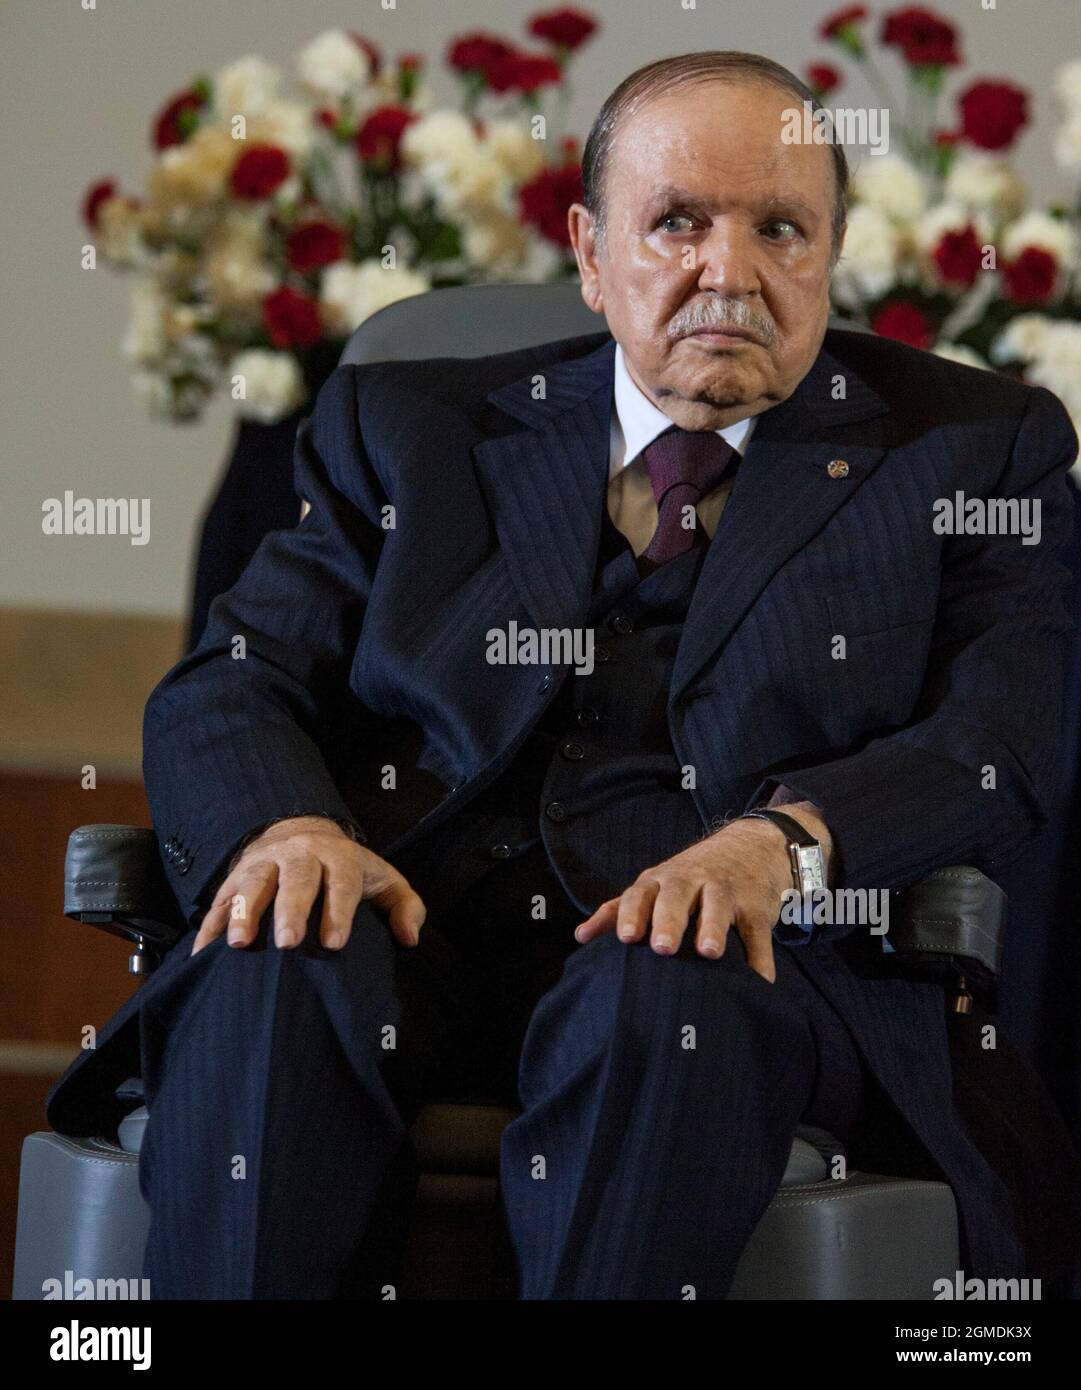 Algerian President Abdulaziz Bouteflika sits in his wheelchair on stage  during his inauguration ceremony as he is sworn as Algeria's President for  a fourth term in Algiers, Algeria, on April 28, 2014.